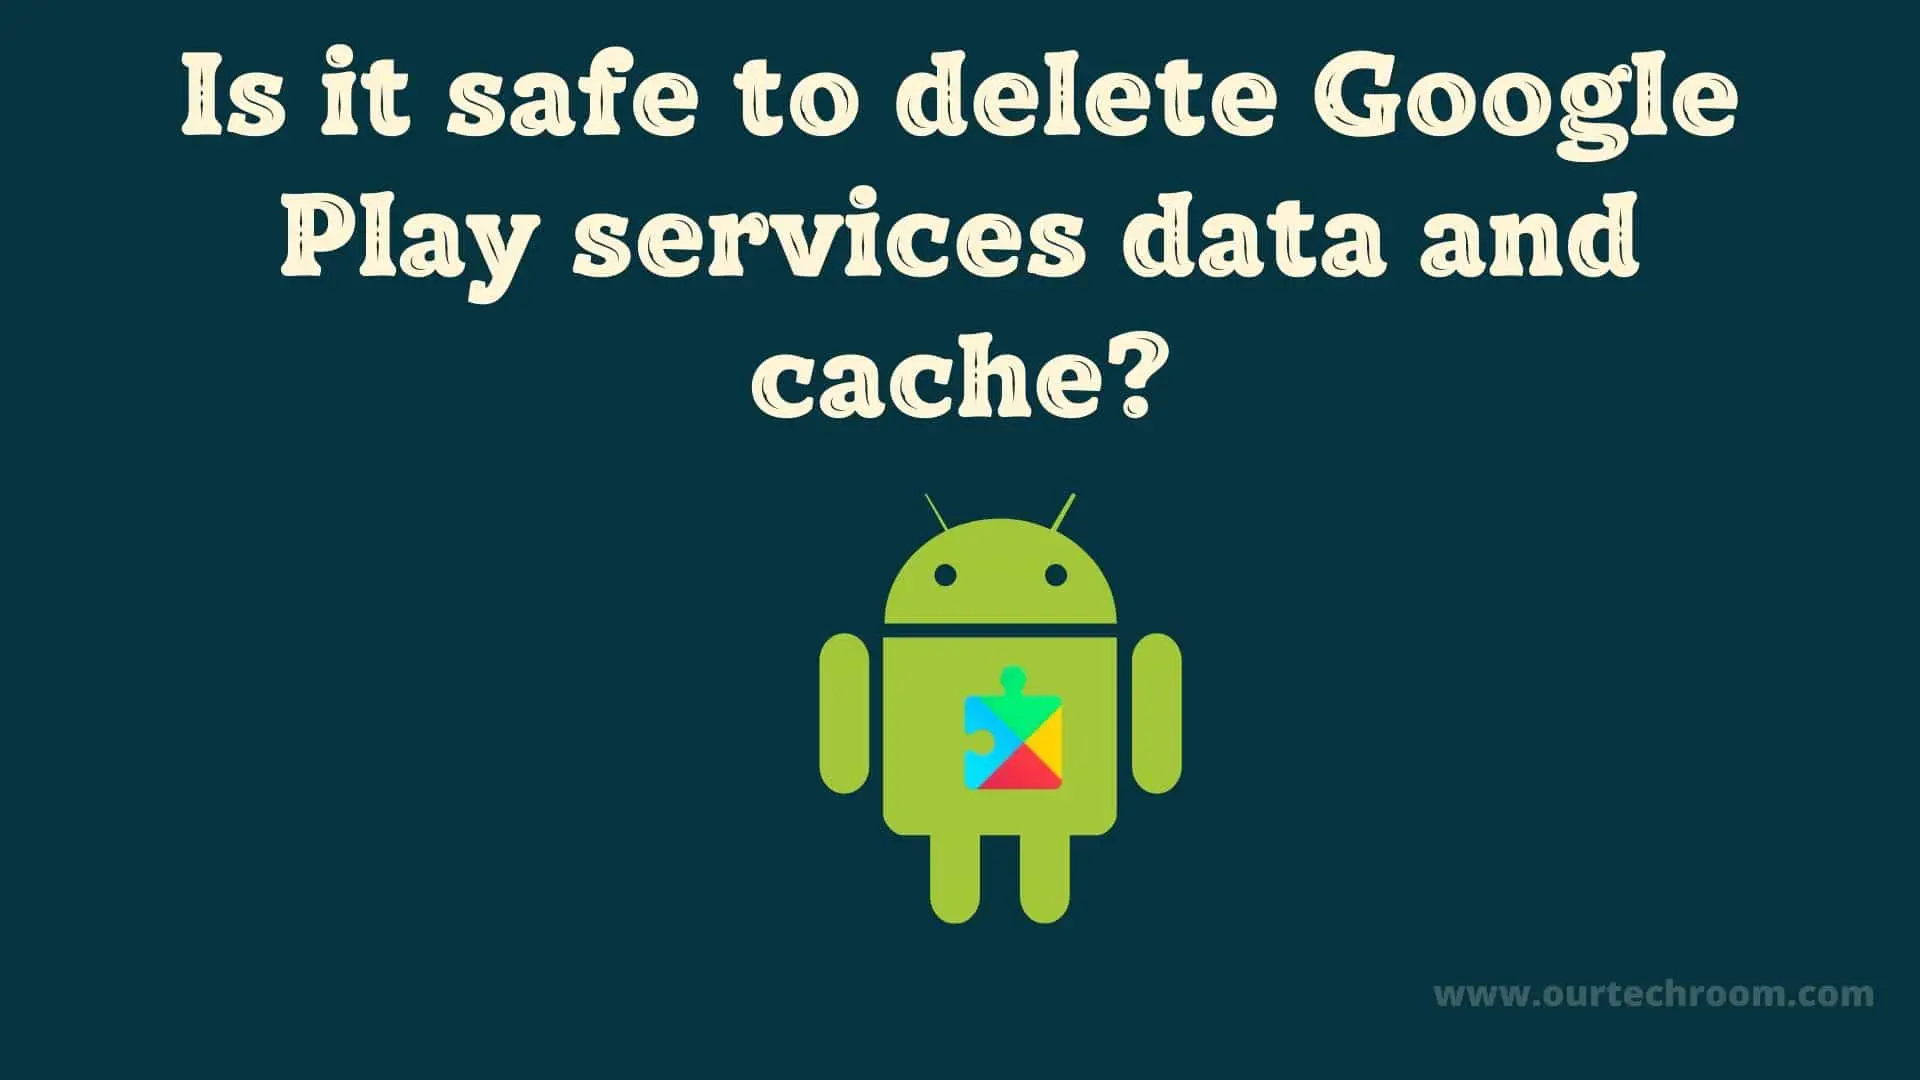 is-it-safe-to-delete-google-play-services-data-and-cache